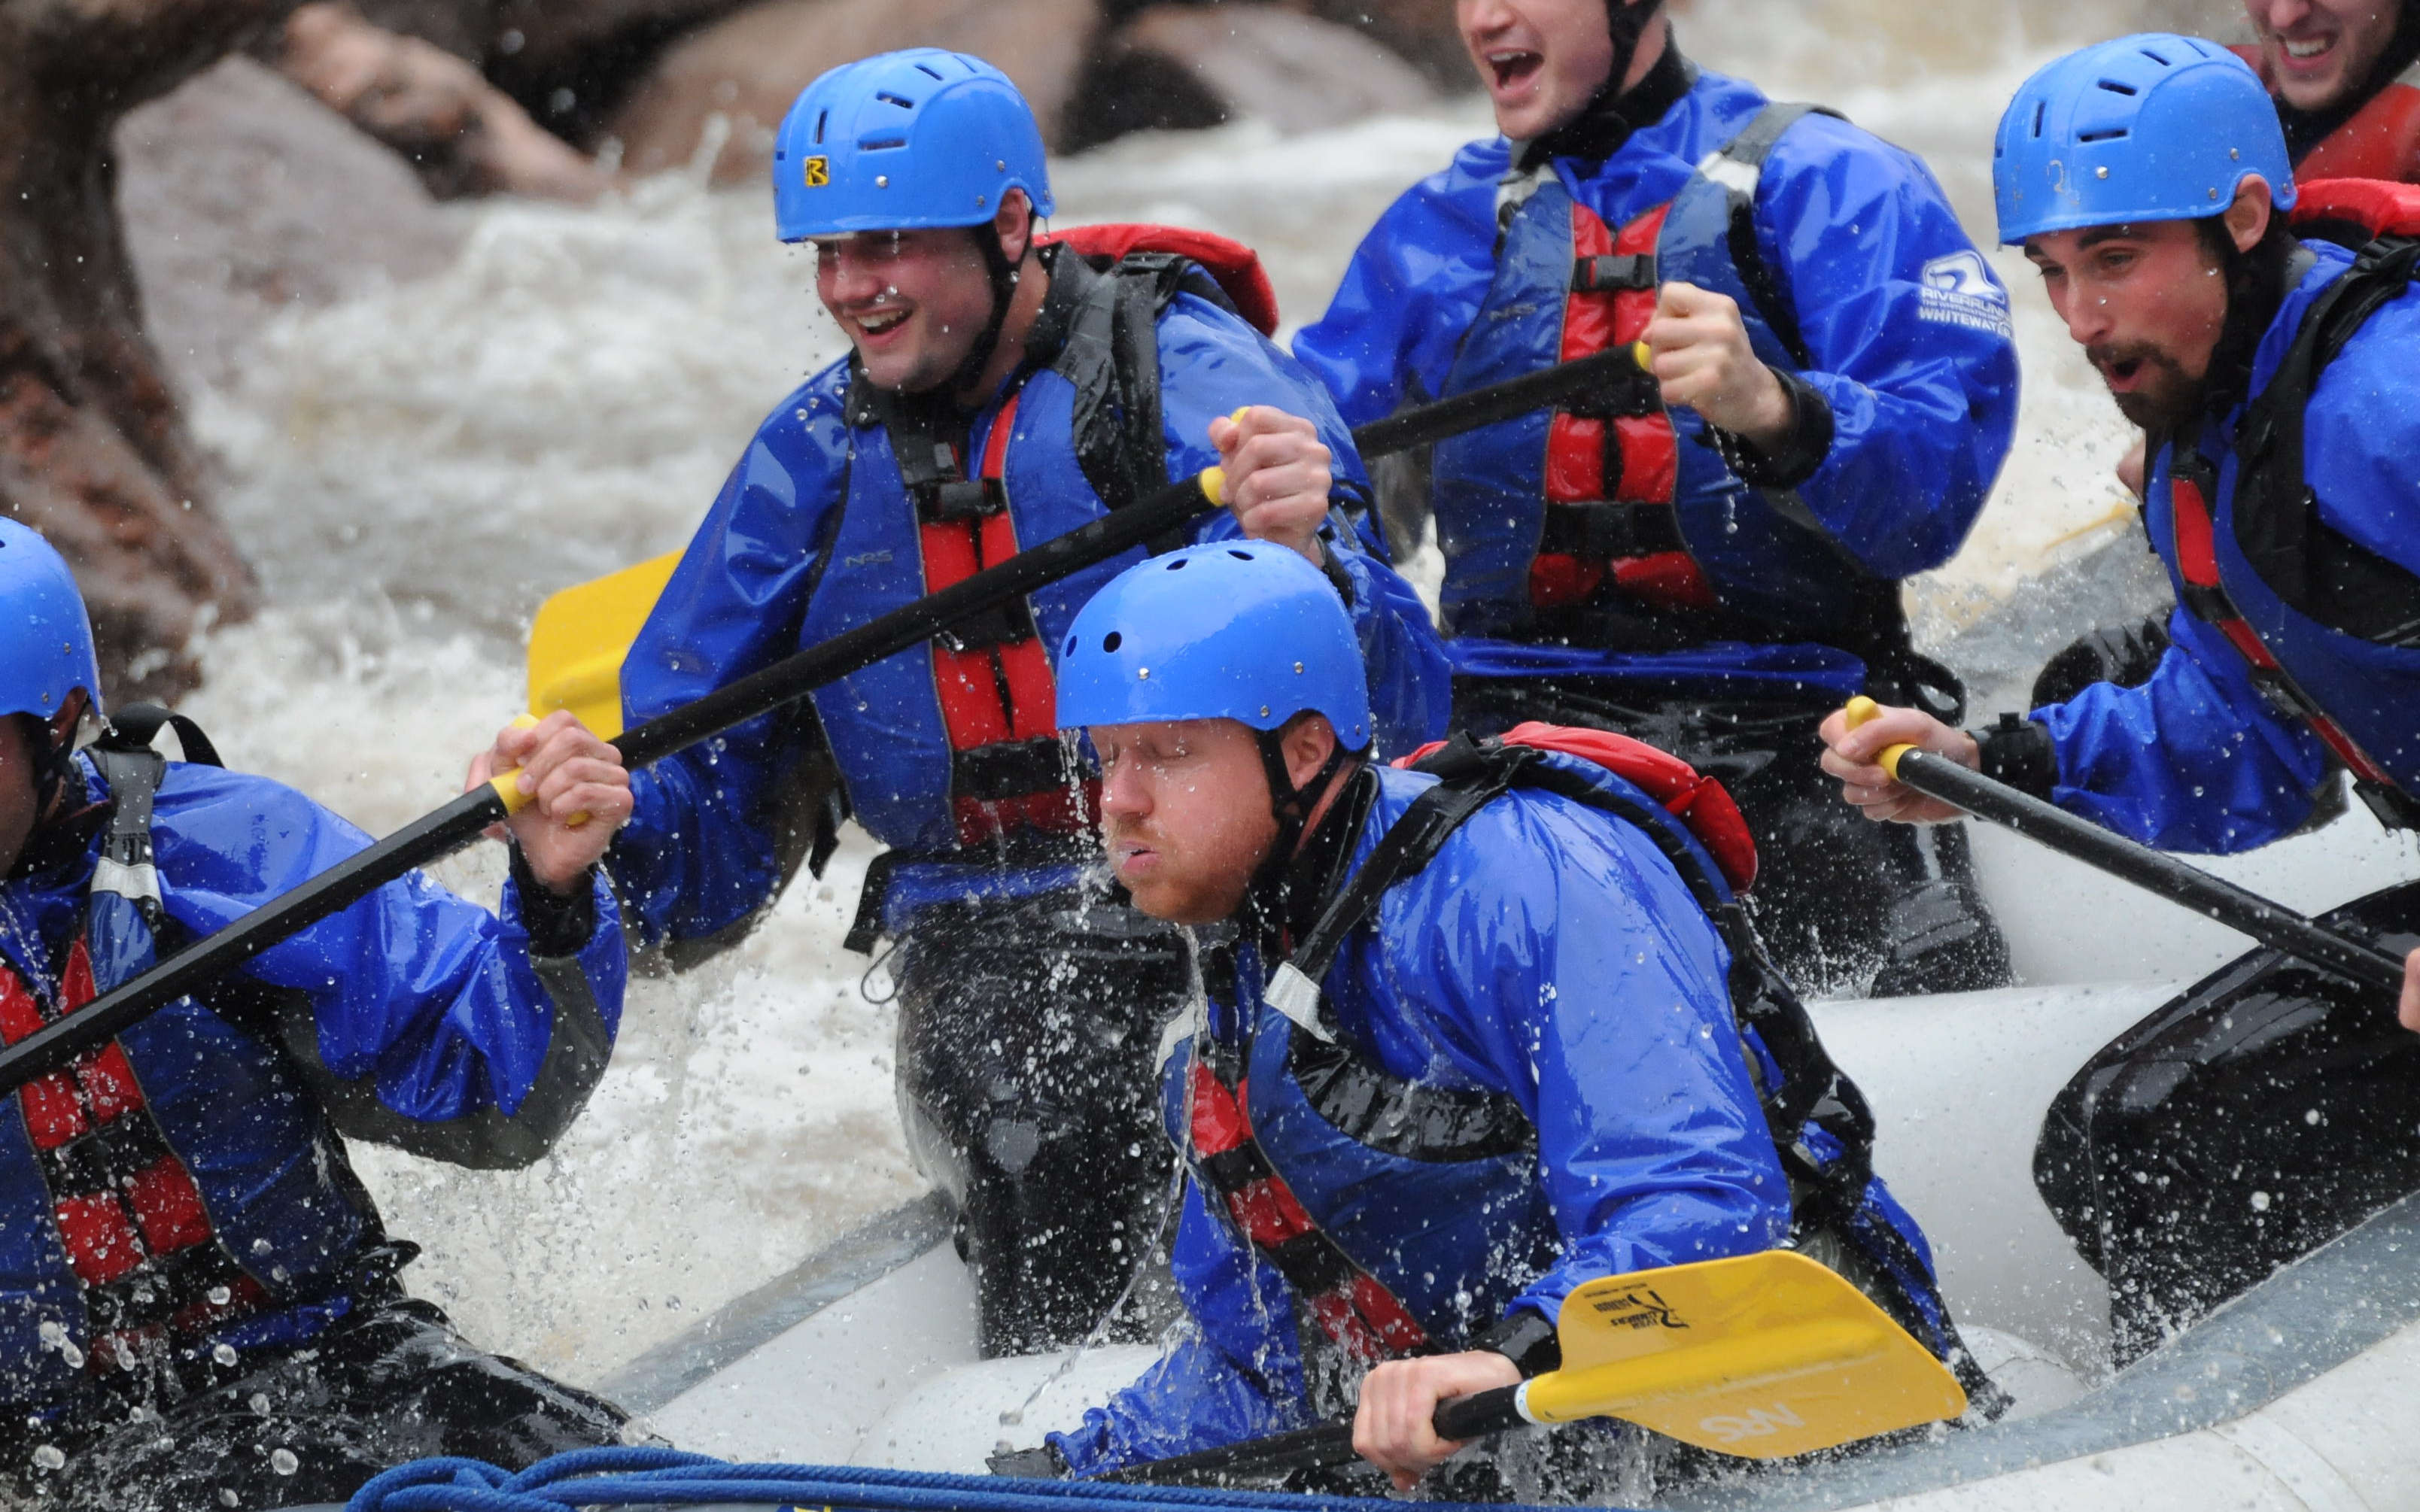 Whitewater rafting the Royal Gorge of the Arkansas River.